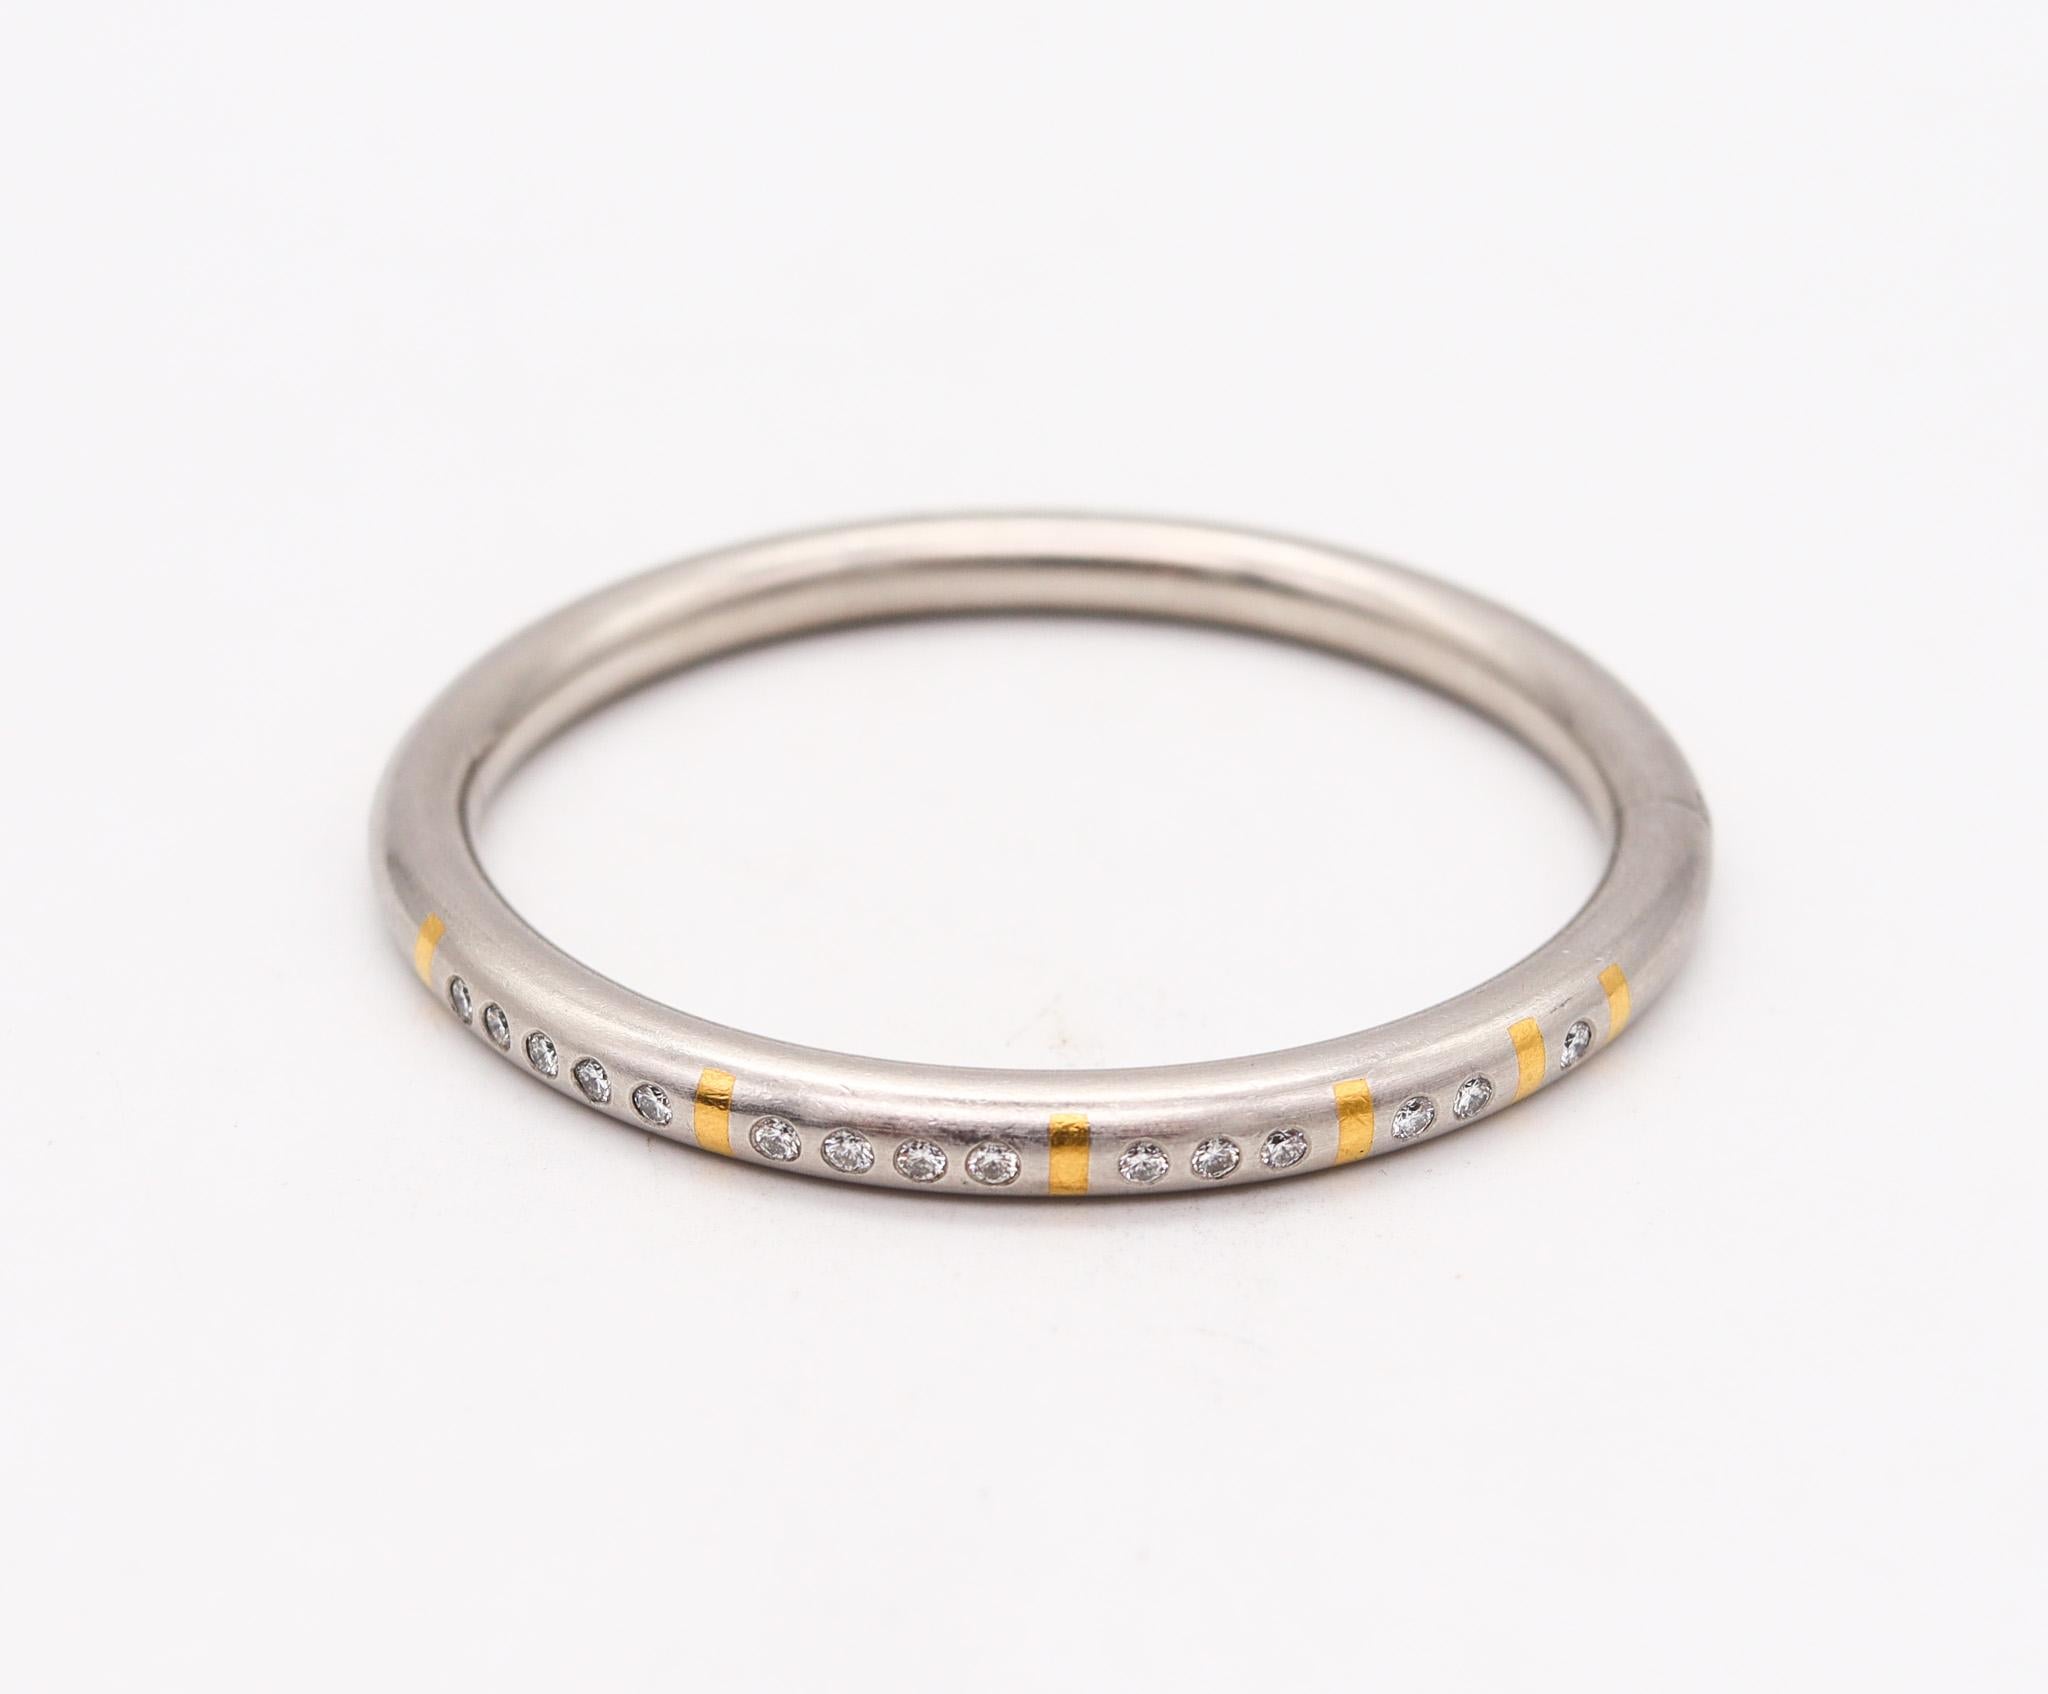 Platinum and gold bangle designed by Henrich & Denzel.

Very modern, sleek and contemporary tubular round bracelet, created by the German-Swiss jewelry designers of Henrich & Denzel. This gorgeous bangle bracelet has been manufactured with